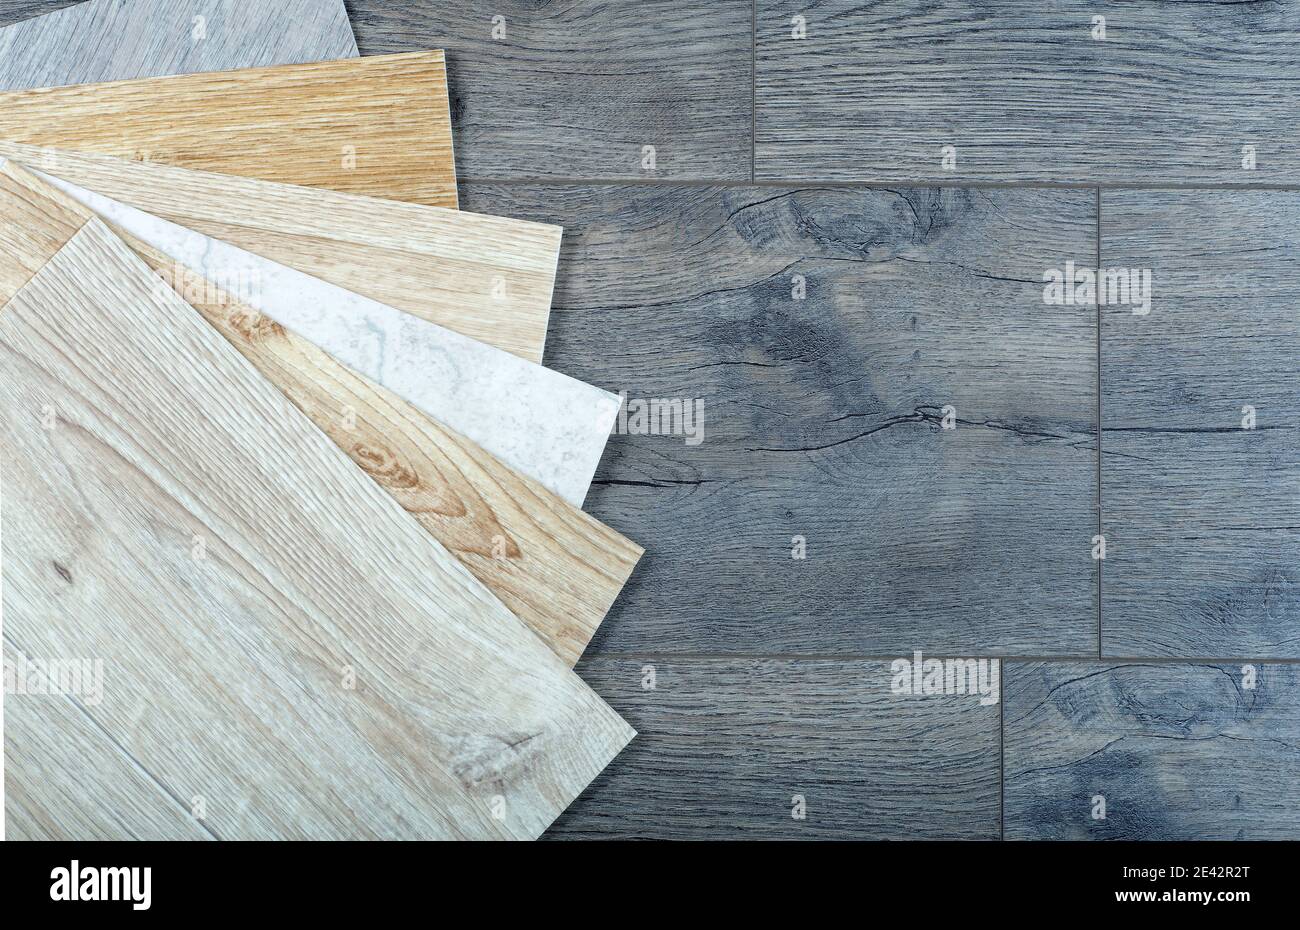 Vinyl and linoleum samples on a wooden background. Vinyl for flooring with wood grain texture and pattern. Stock Photo